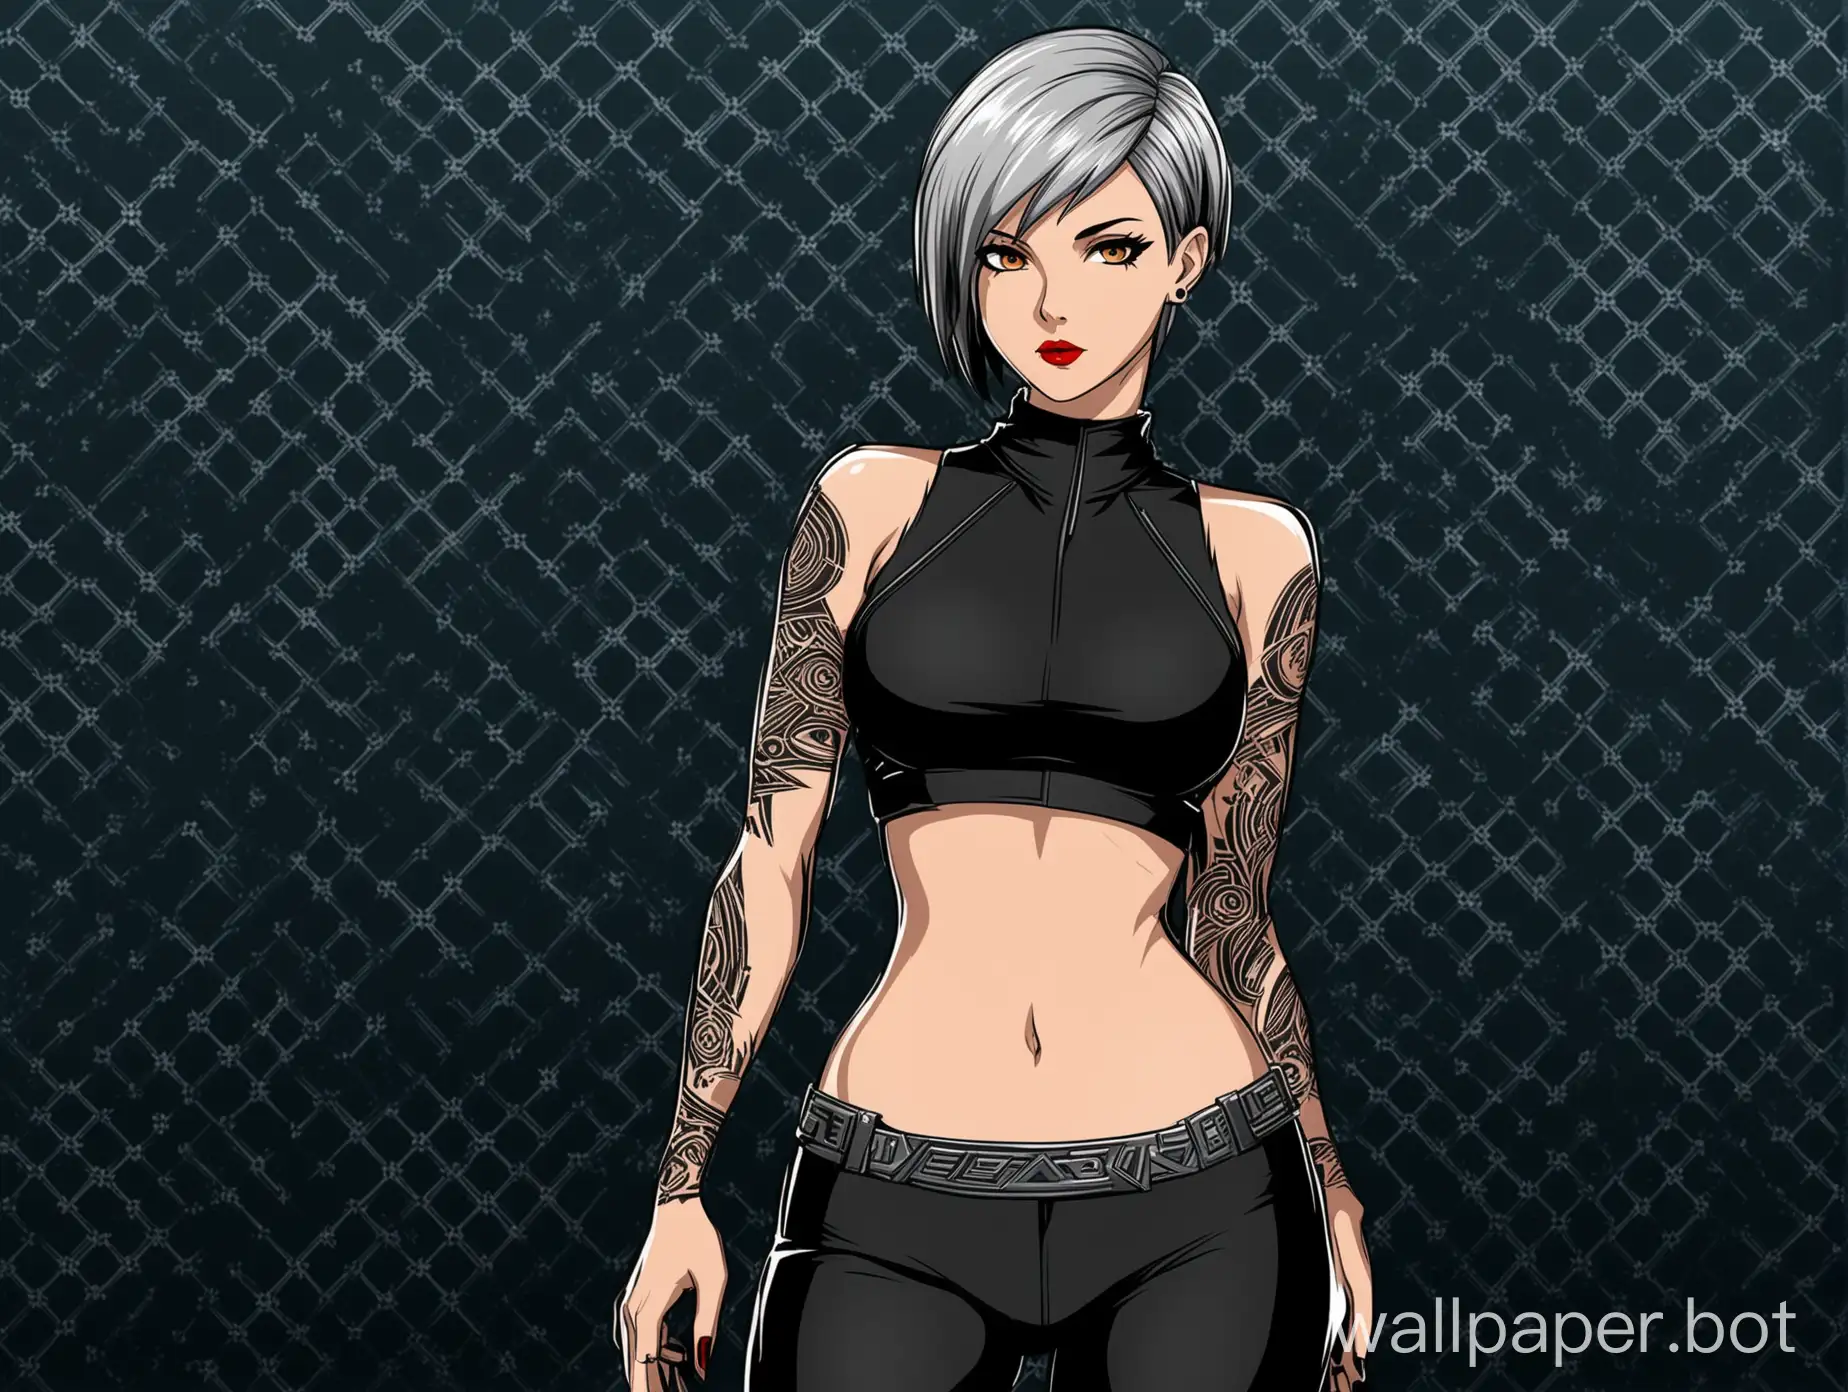 Sultry-Anime-Female-Character-with-Silver-Hair-in-TechInspired-Wallpaper